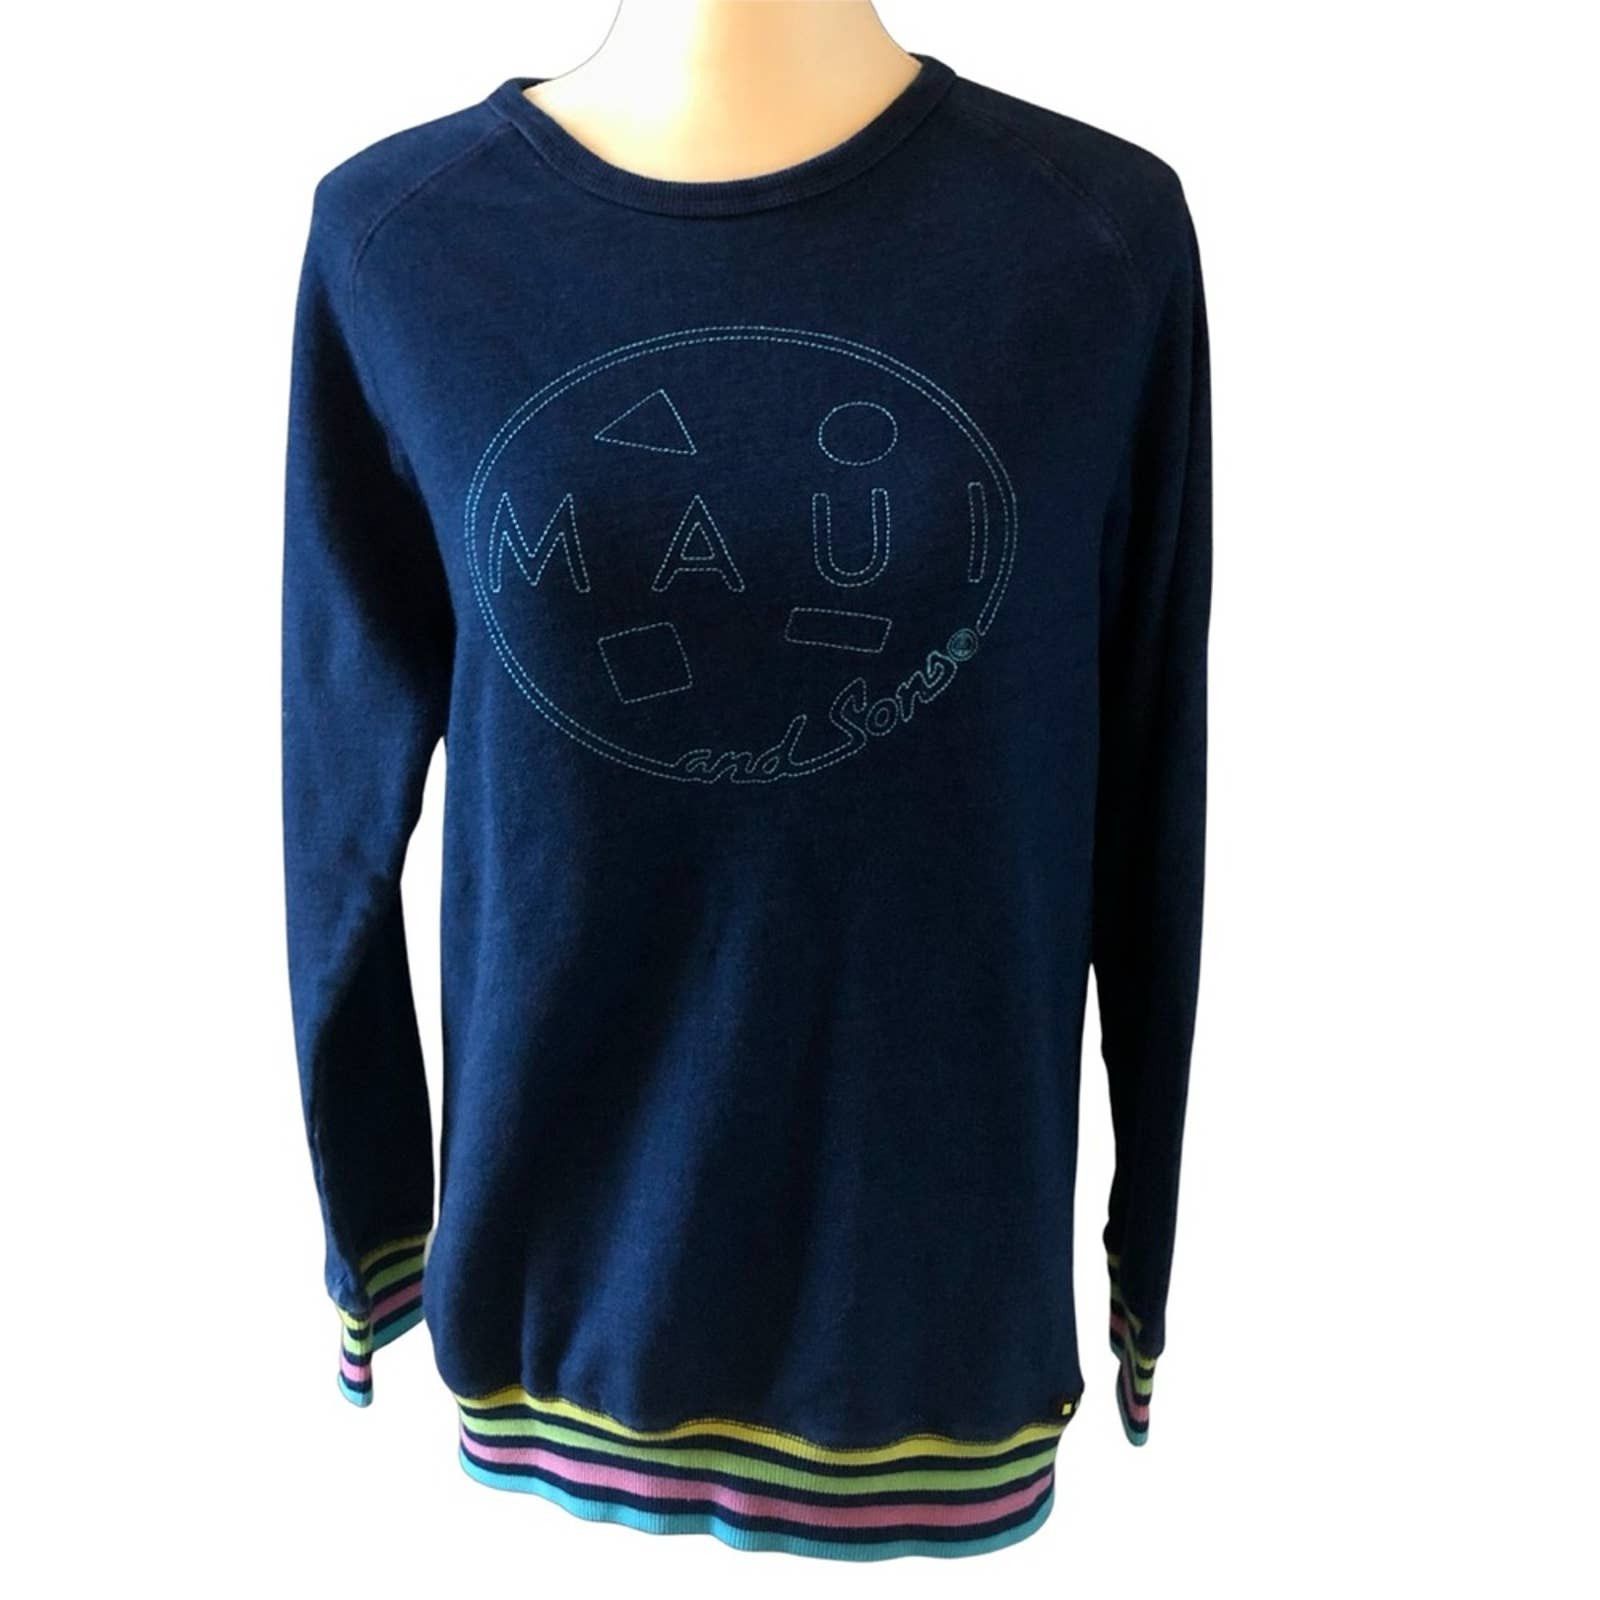 Maui And Sons Maui & Sons Navy Blue Long Sweatshirt Size Medium Size M / US 6-8 / IT 42-44 - 1 Preview